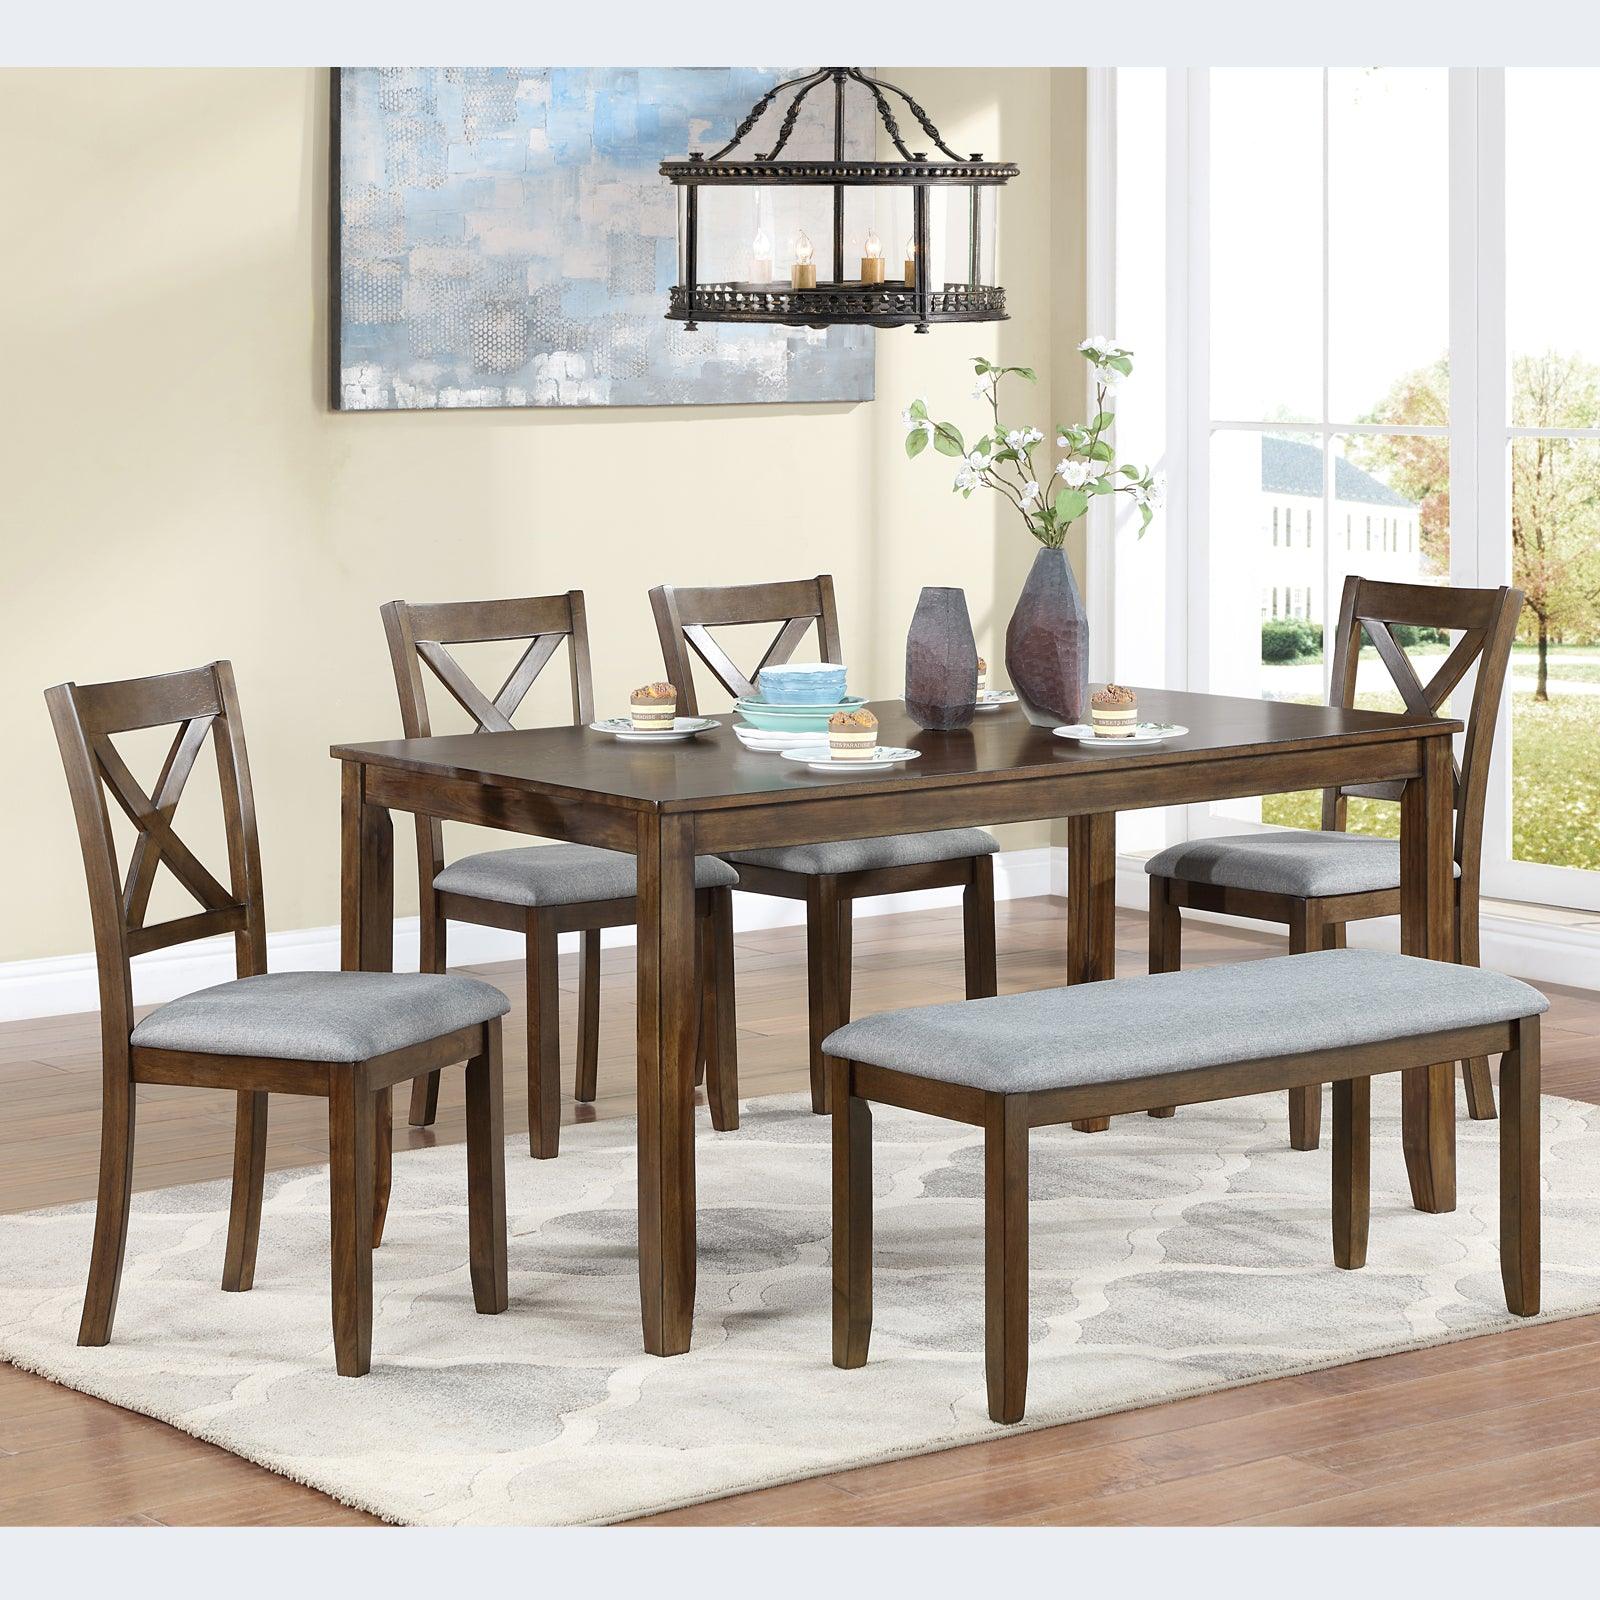 🆓🚛 Wooden Dining Rectangular Table Set With Bench for 6, Kitchen Dining Table With Bench for Small Space, Walnut